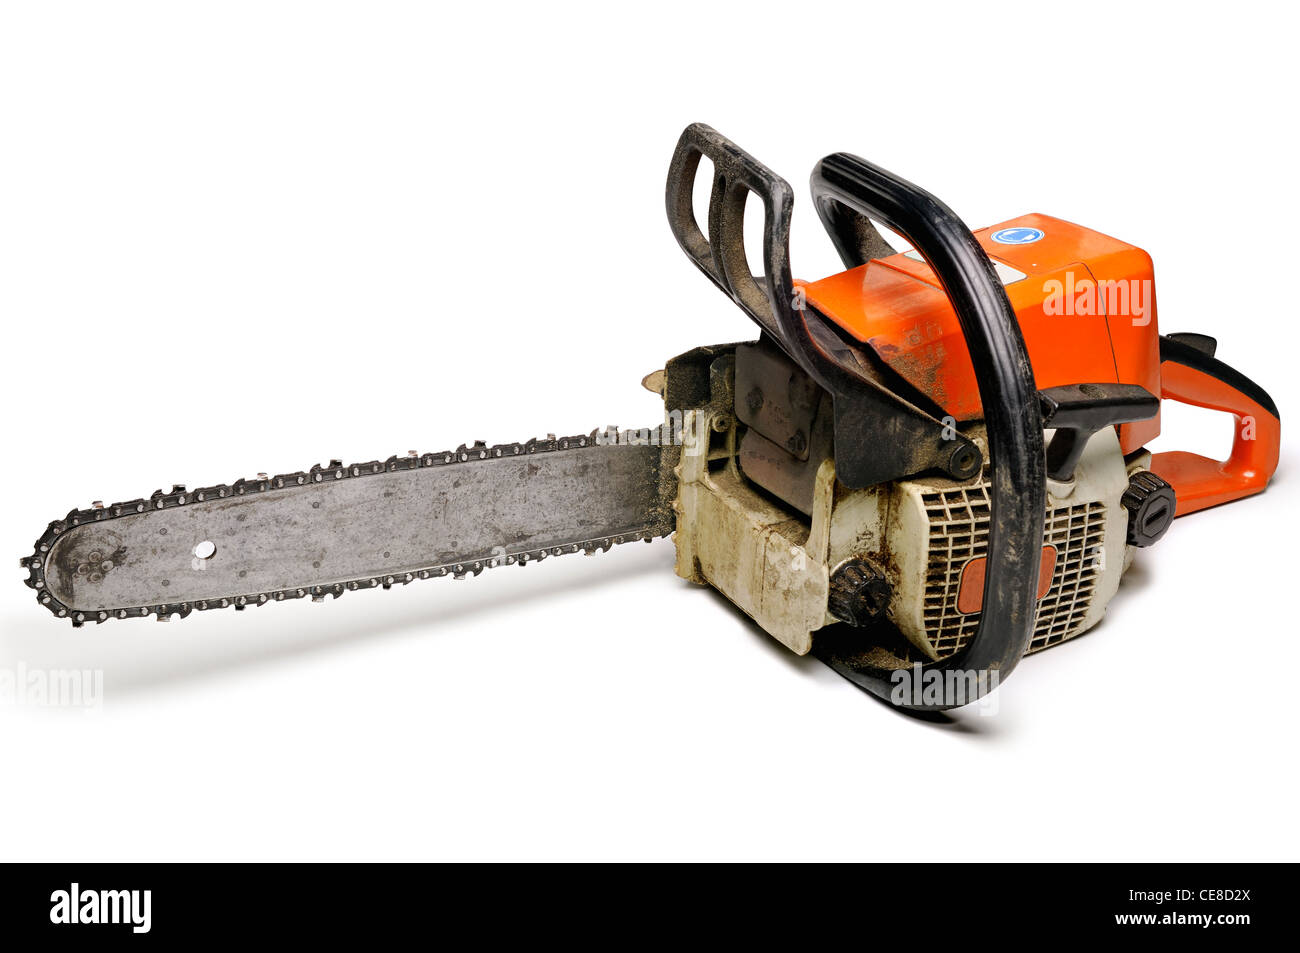 Chainsaw, Cut Out. Stock Photo